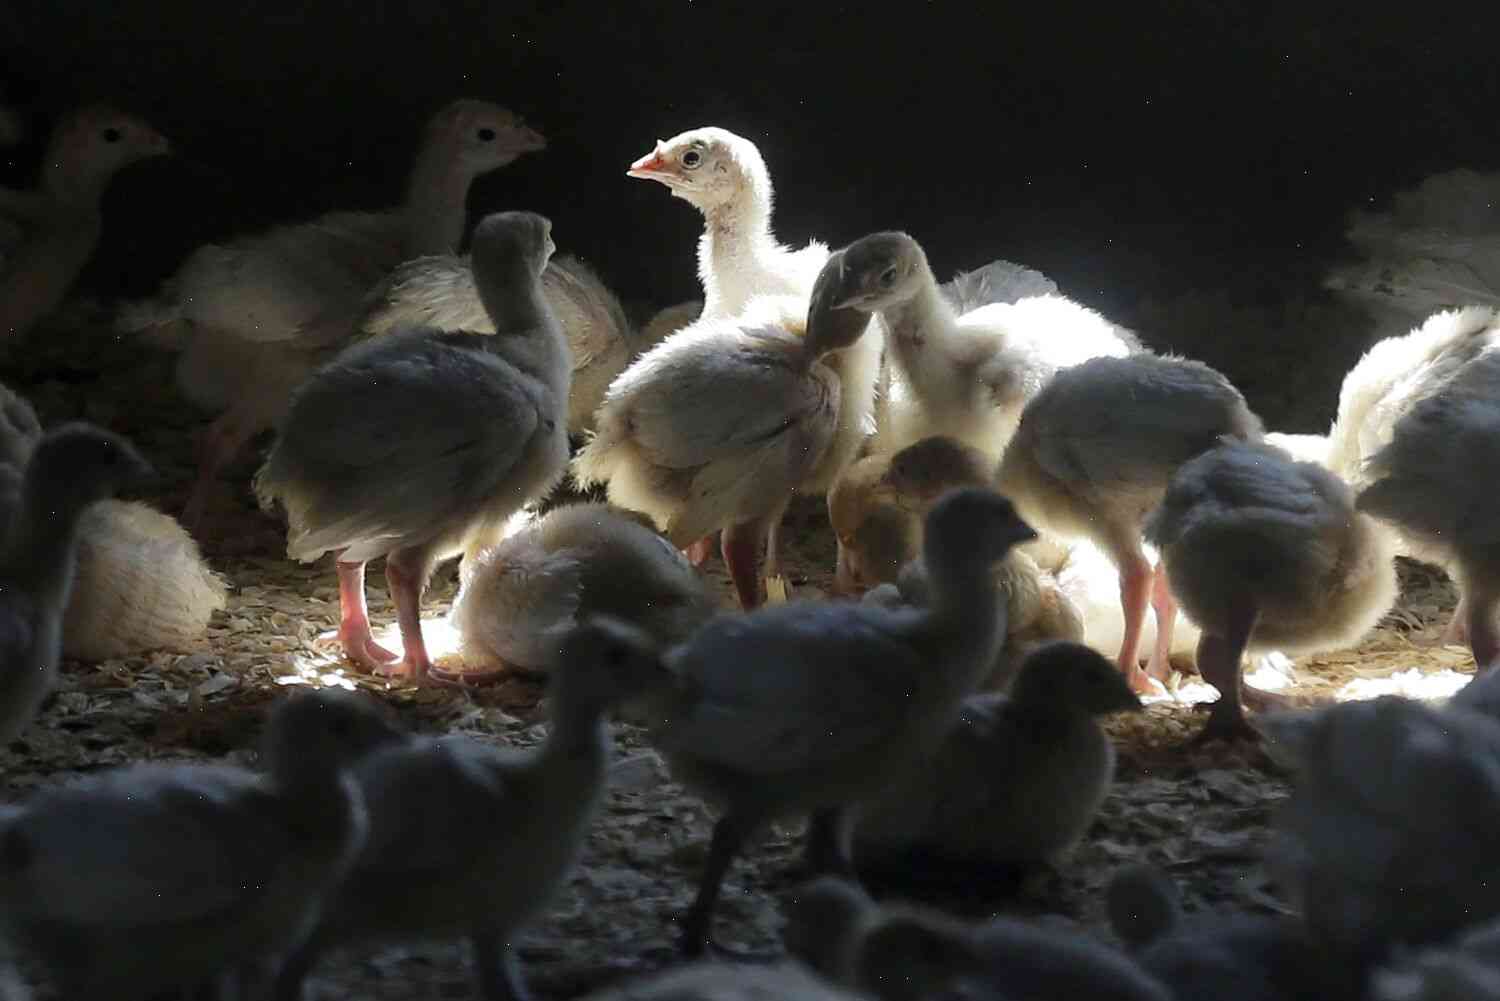 Los Angeles Zoo is investigating a wild bird case that sickened at least six ducks